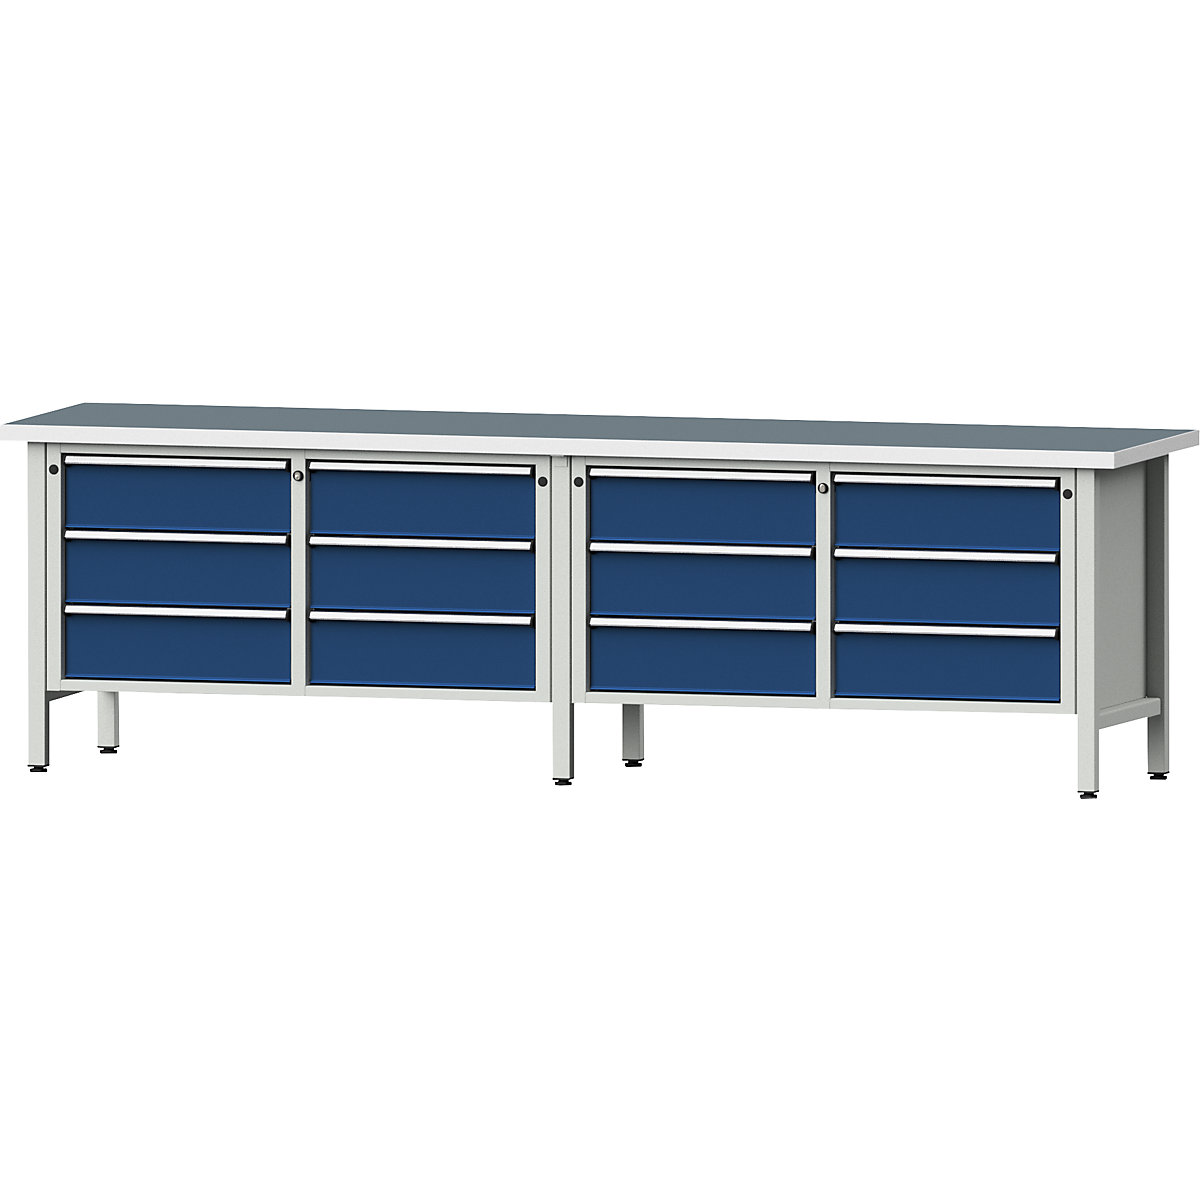 Workbench width 2800 mm, frame construction – ANKE, 12 drawers, 180 mm with partial extension, universal worktop-10